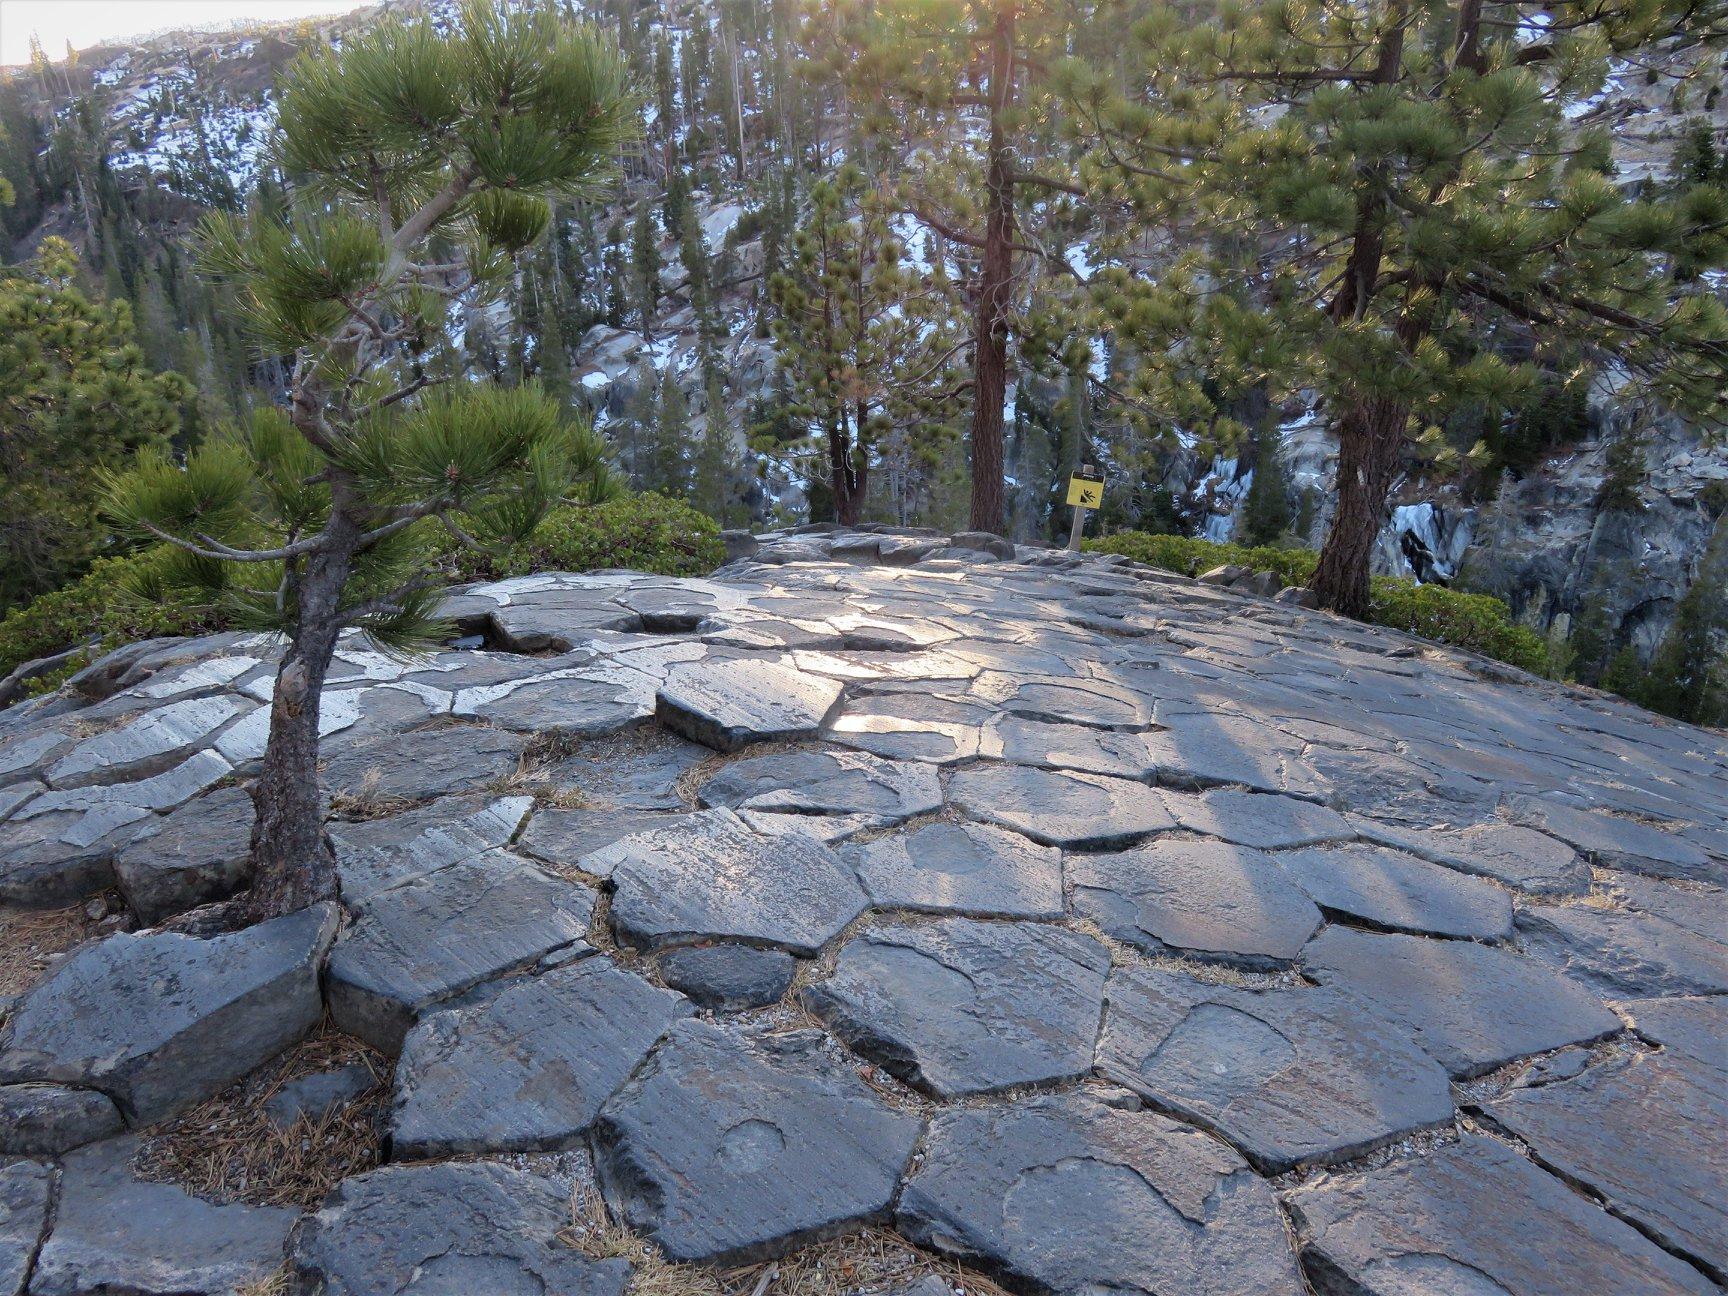 Hexagonal Fractures at the top of Devils Postpile